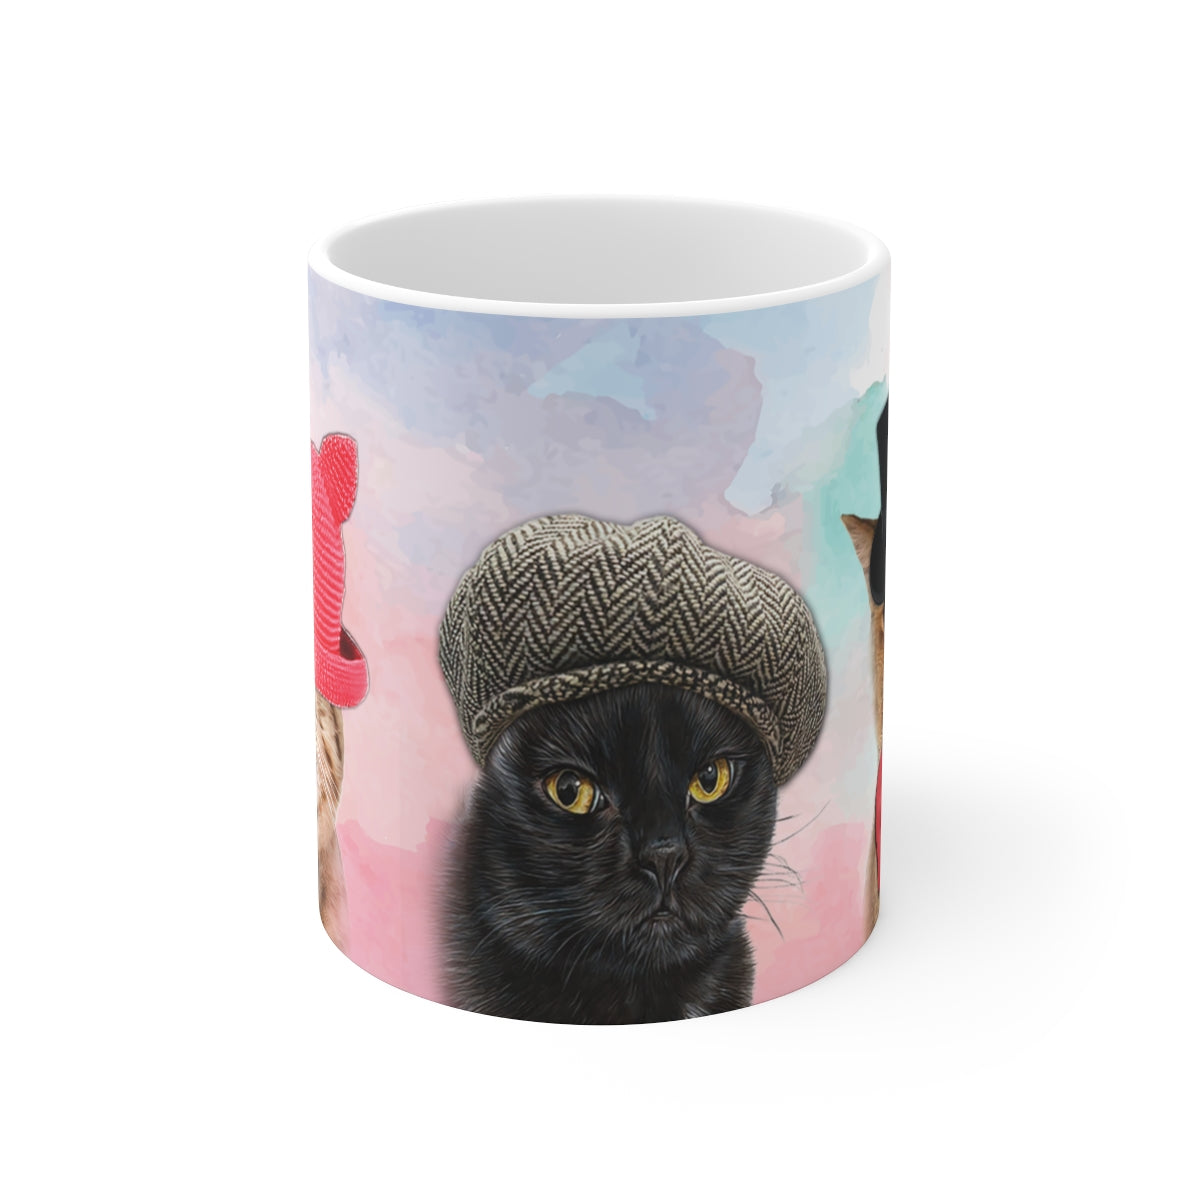 Cats In Hats Mug (White)